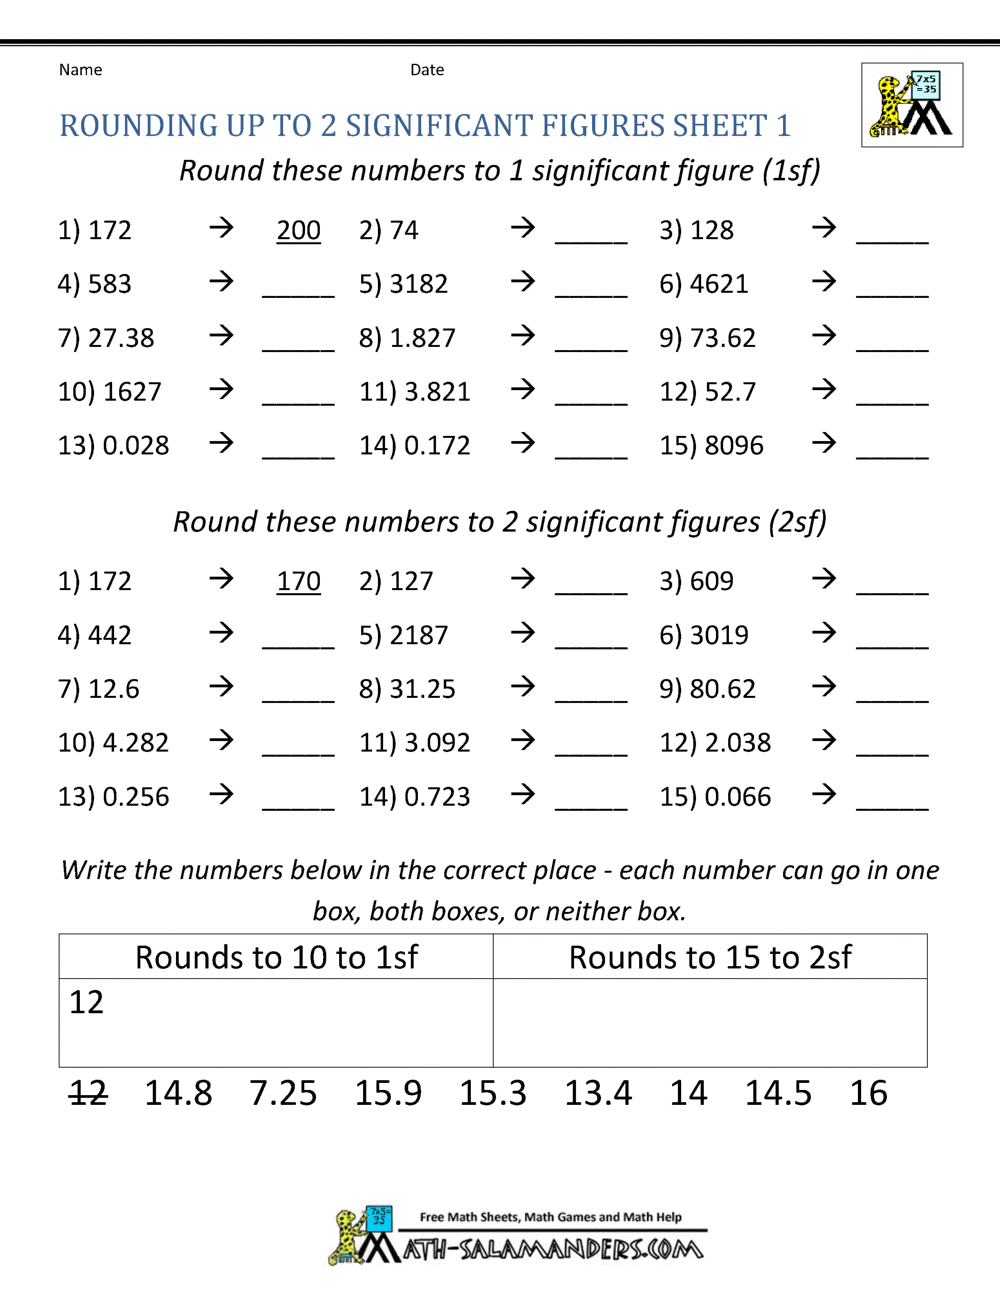 Rounding Significant Figures Within Significant Figures Worksheet With Answers